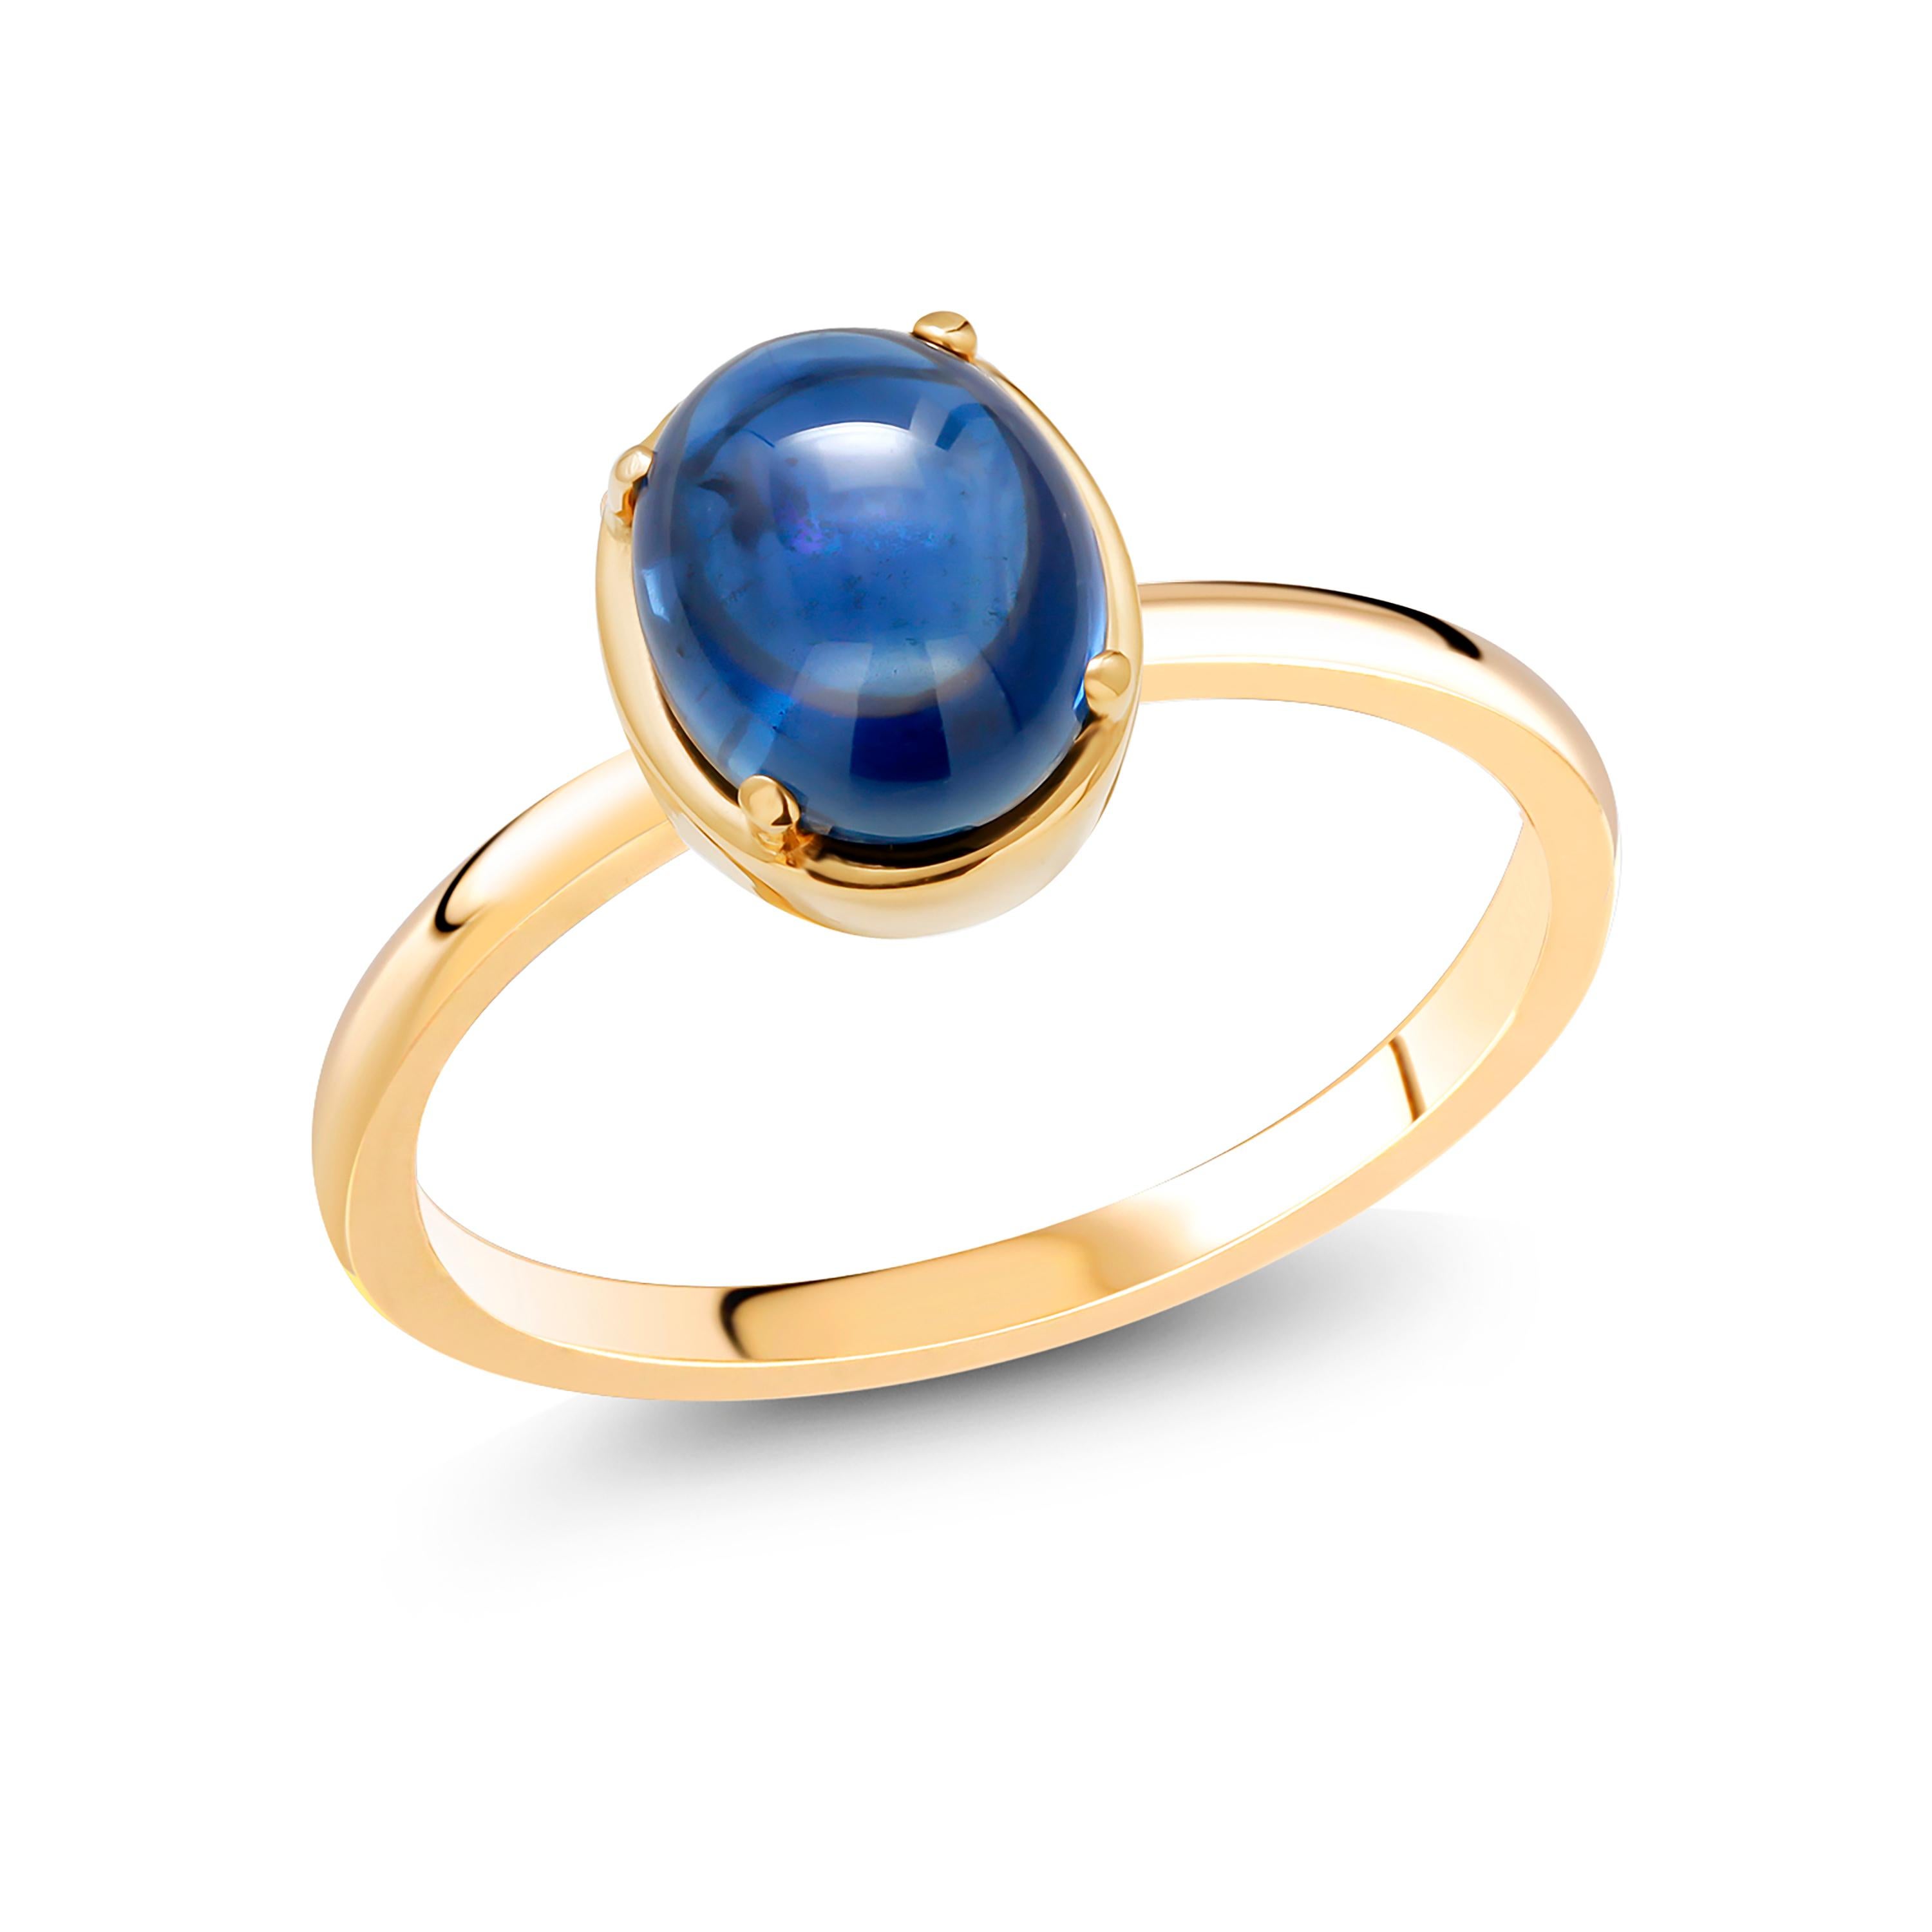 Oval Cut Ceylon Cabochon Sapphire Weighing 4.20 Carat Yellow Gold Cocktail Solitaire Ring